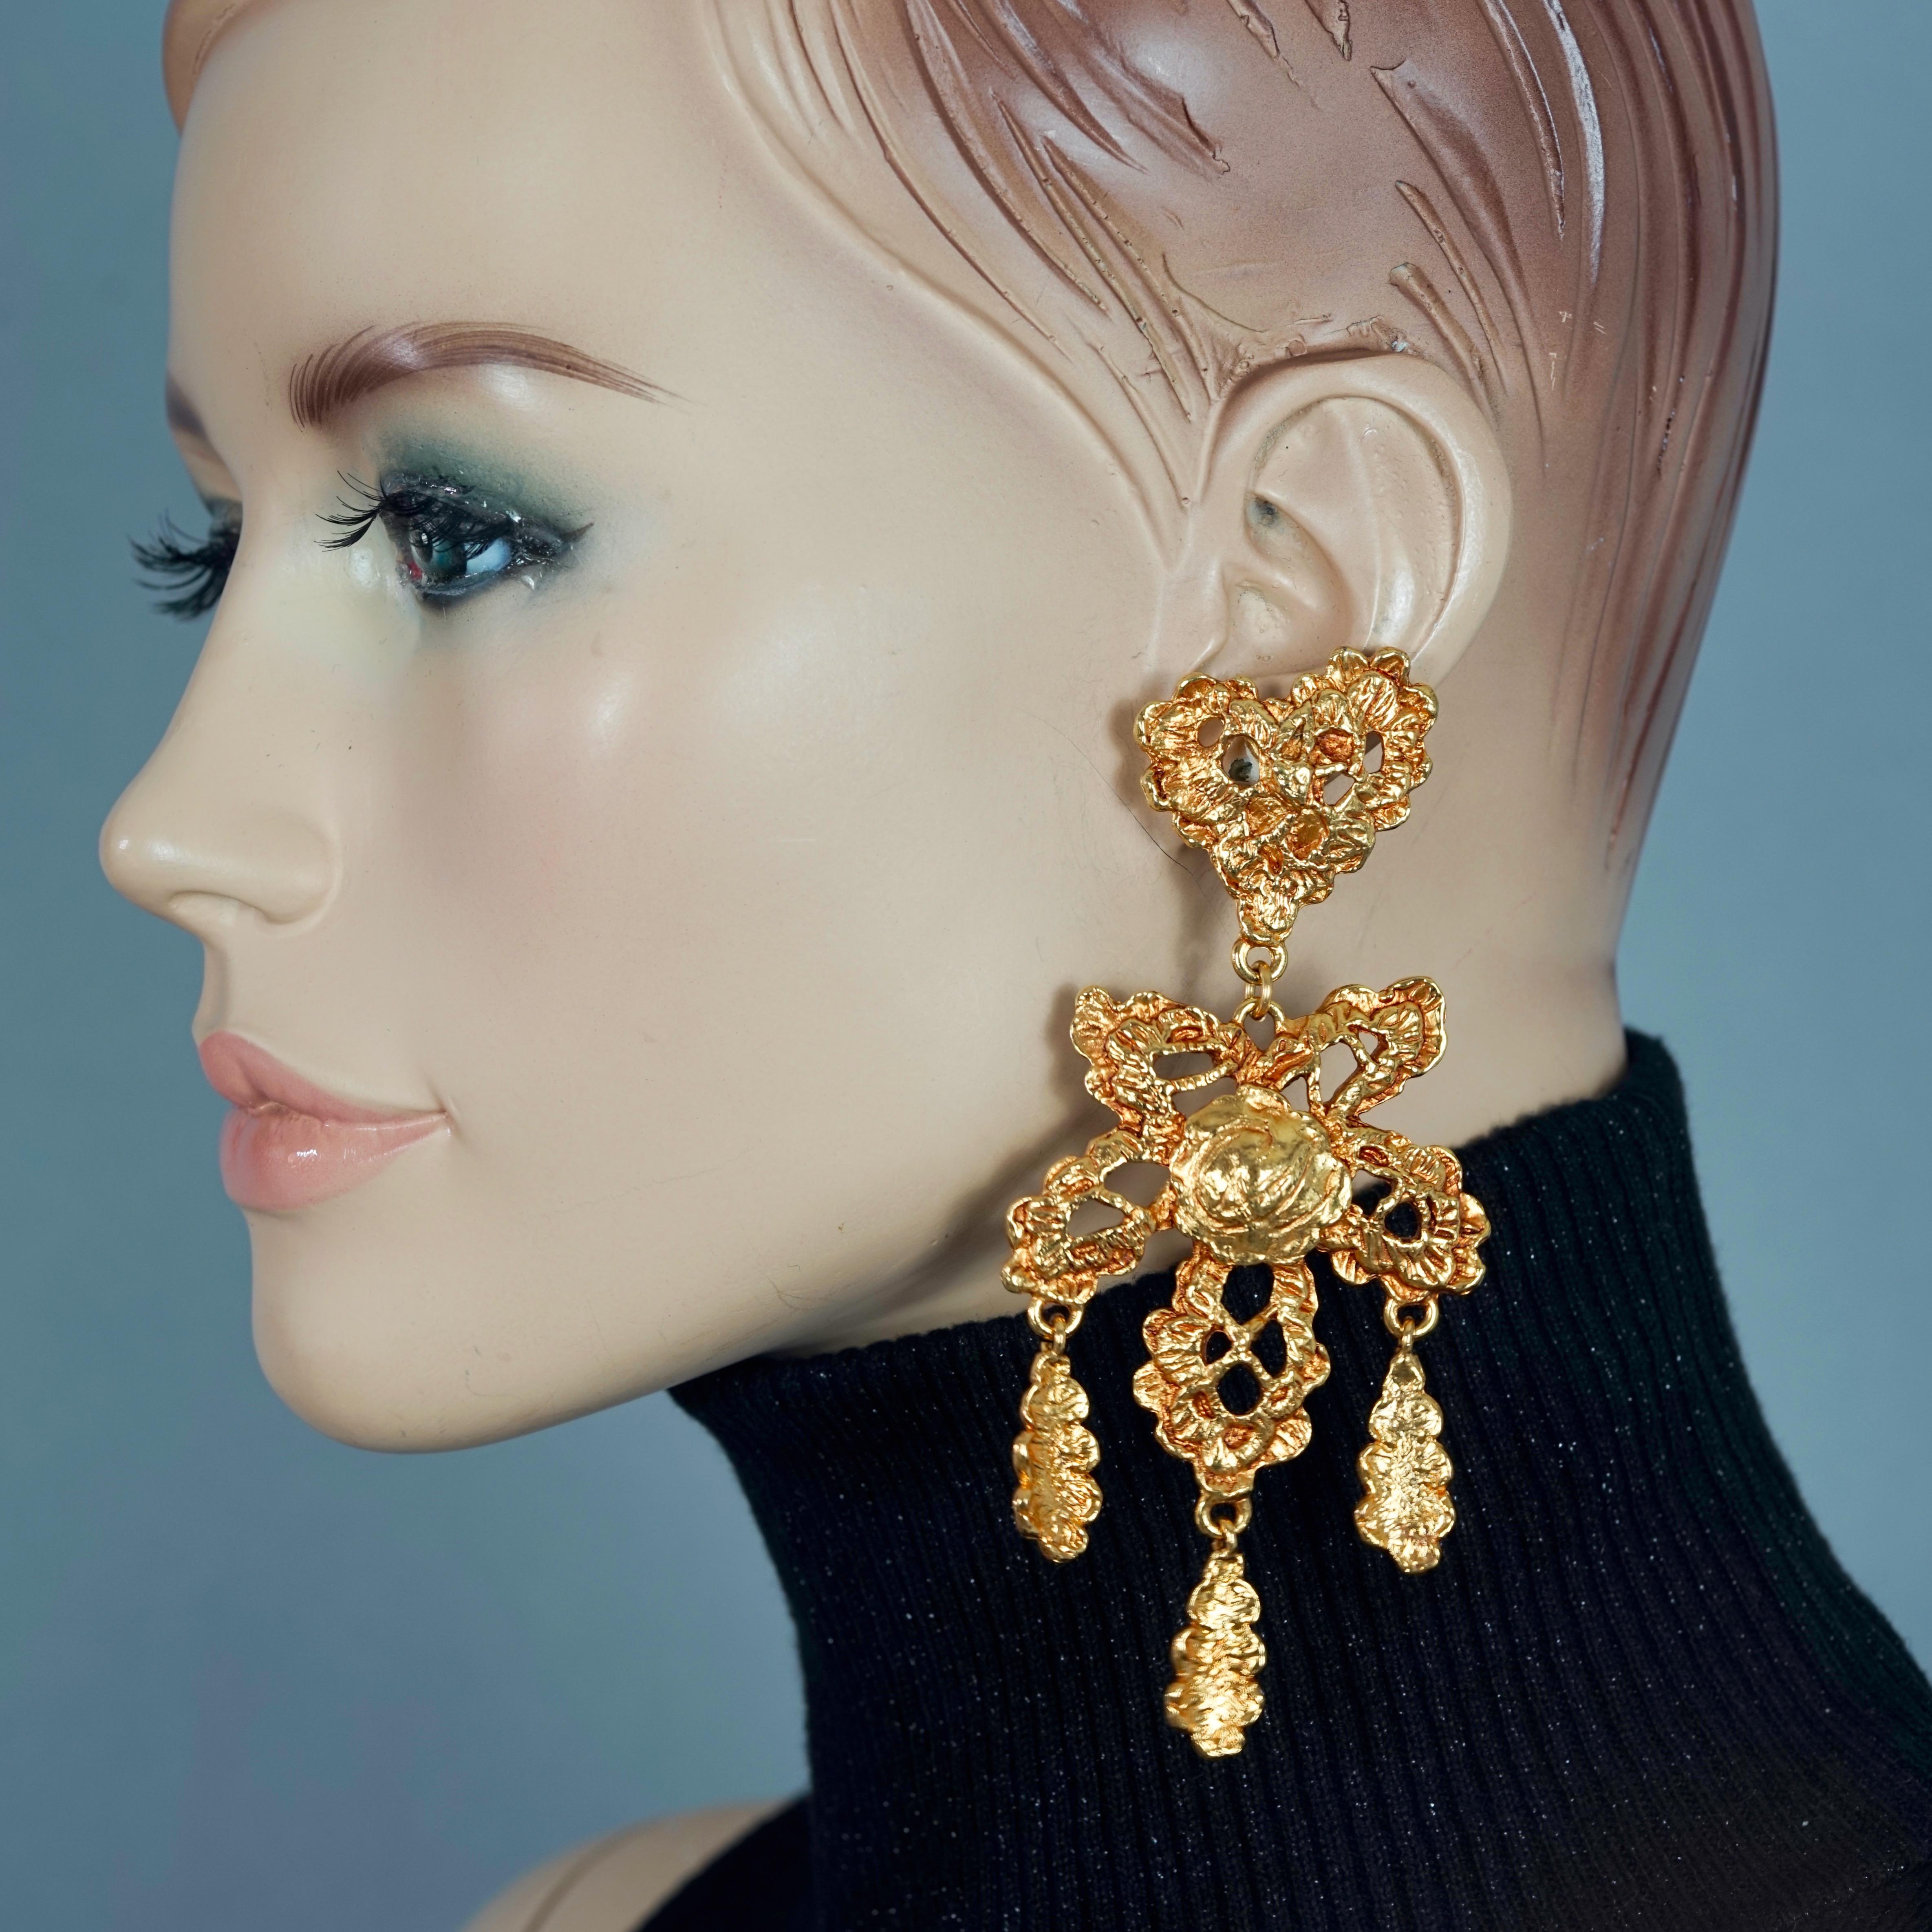 Vintage CHRISTIAN LACROIX Logo Lace Heart Flower Dangling Earrings

Measurements:
Height: 4.52 inches (11.5 cm)
Width: 2.04 inches (5.2 cm)
Weight per Earring: 33 grams

Features:
- 100% Authentic CHRISTIAN LACROIX.
- Long gilt lace heart and flower